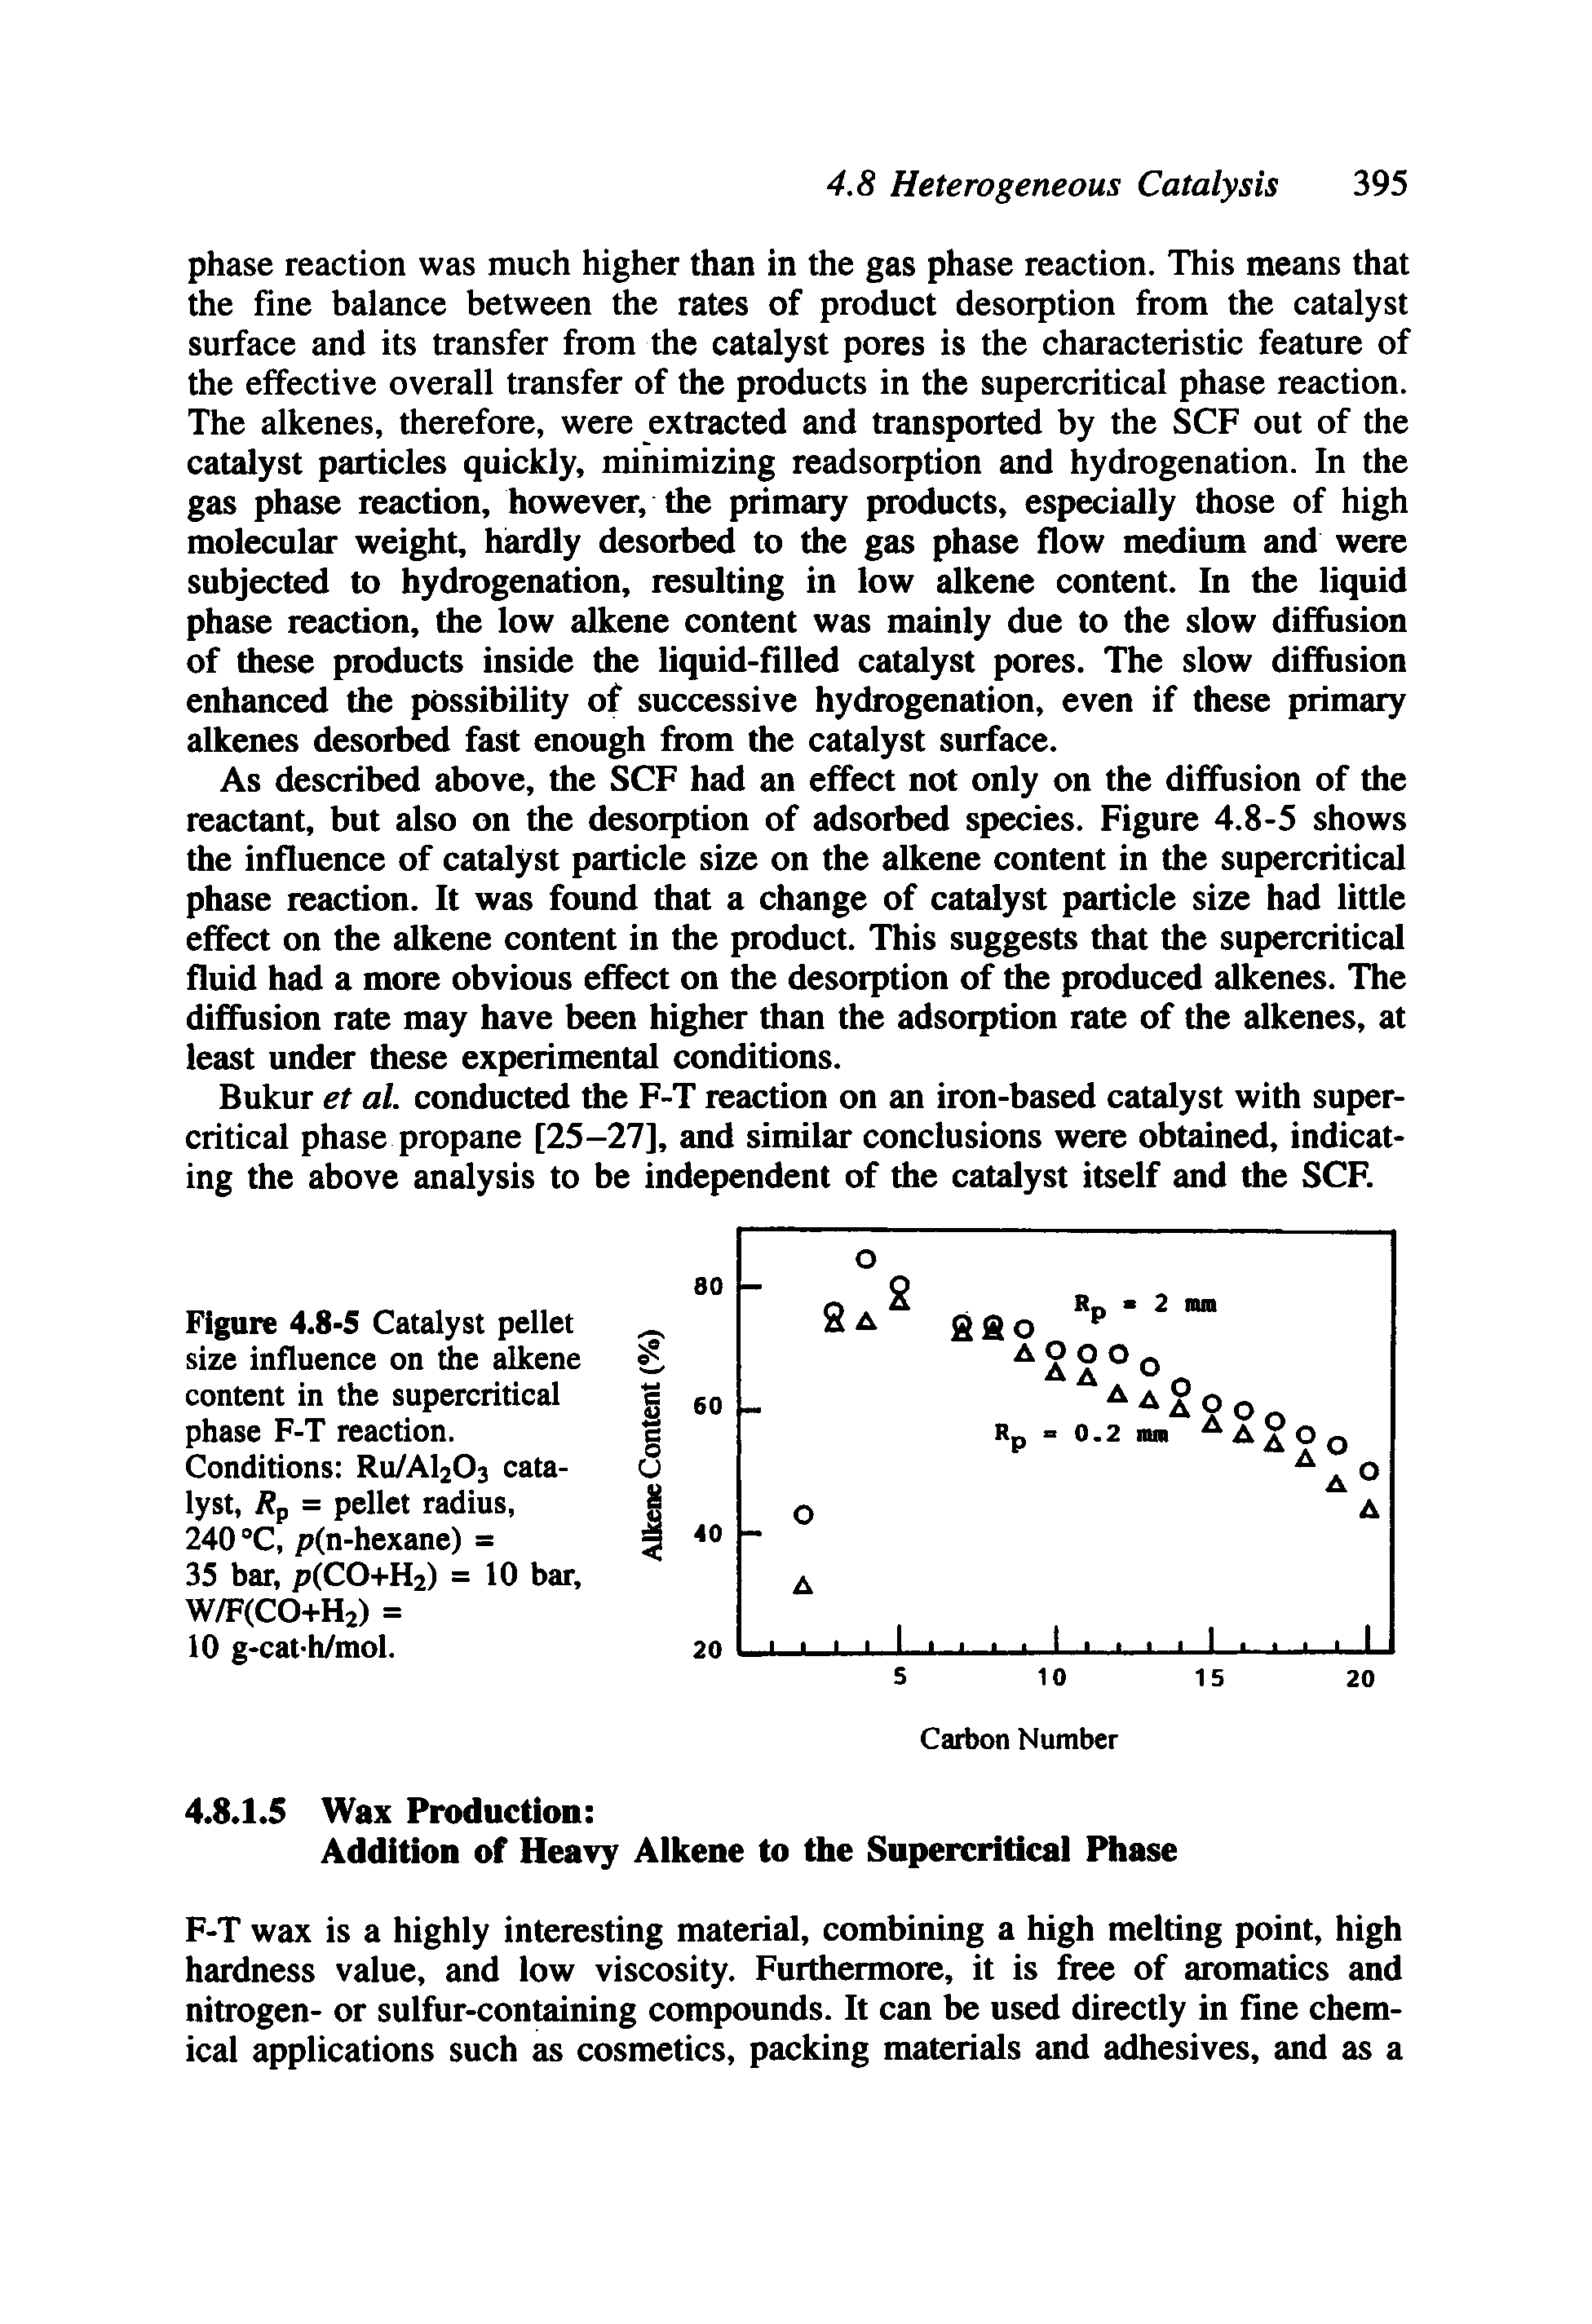 Figure 4.8-5 Catalyst pellet size influence on the alkene content in the supercritical phase F-T reaction. Conditions RU/AI2O3 catalyst, Rp = pellet radius,...